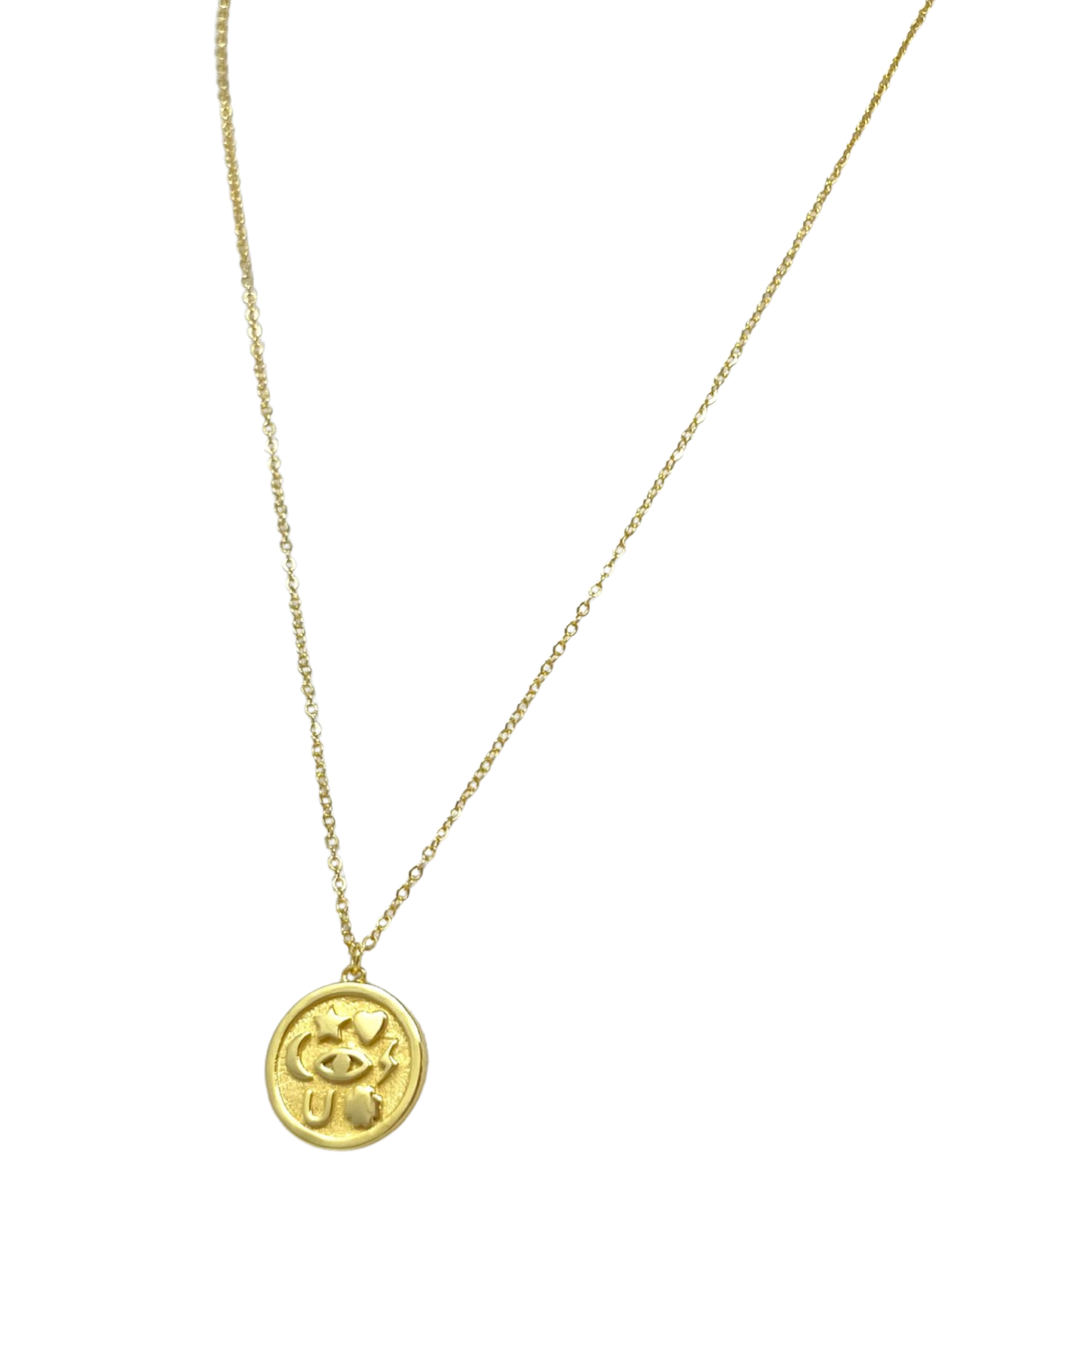 Union Necklace in Gold